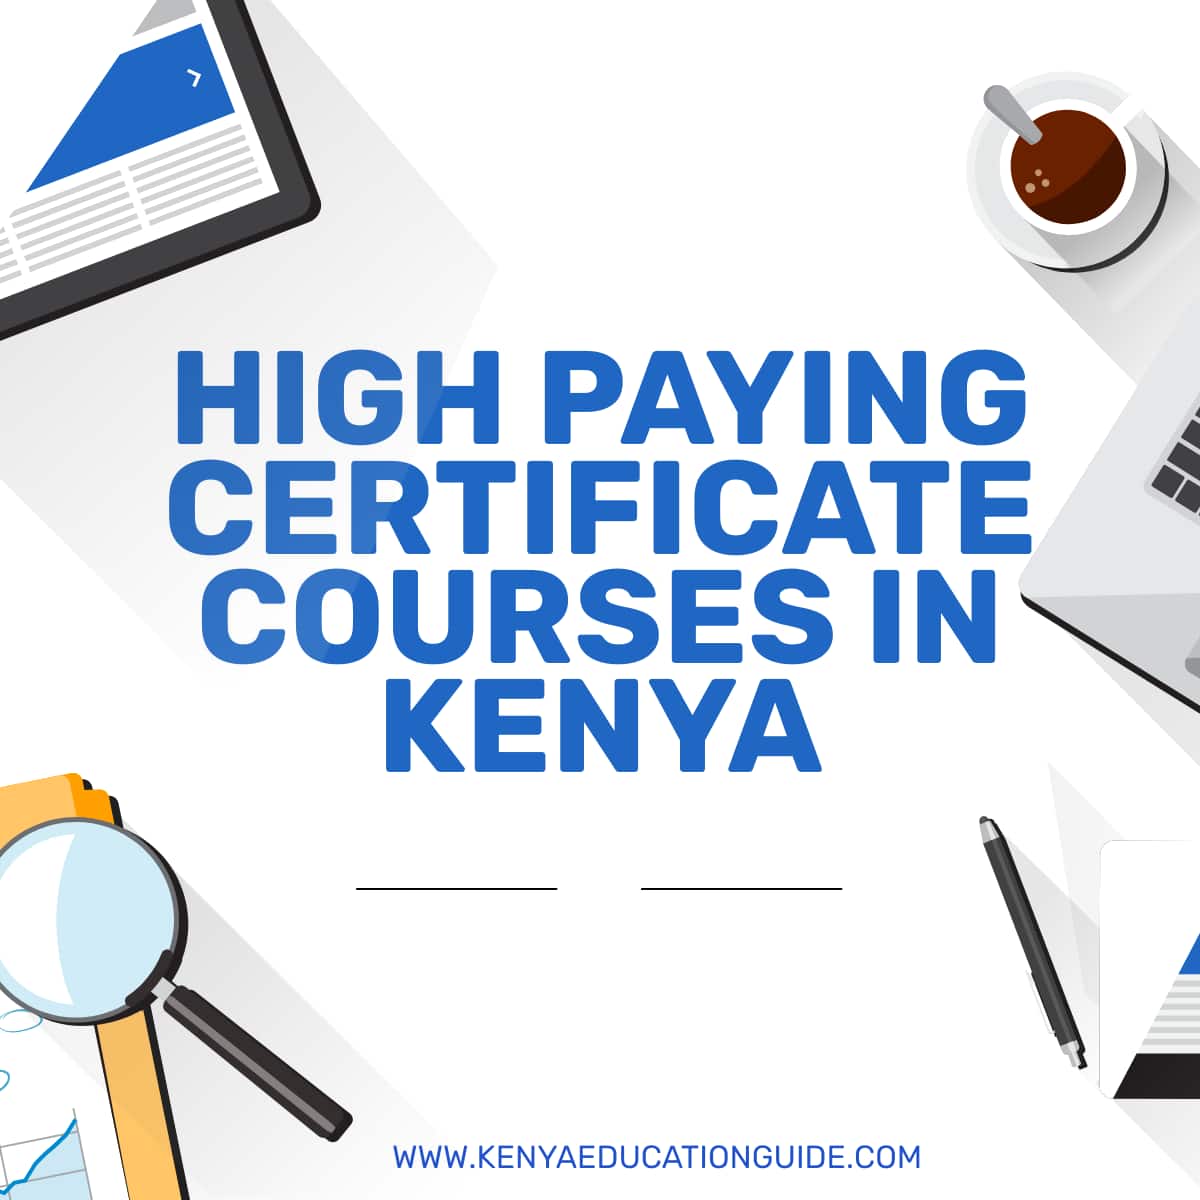 High Paying Certificate Courses in Kenya